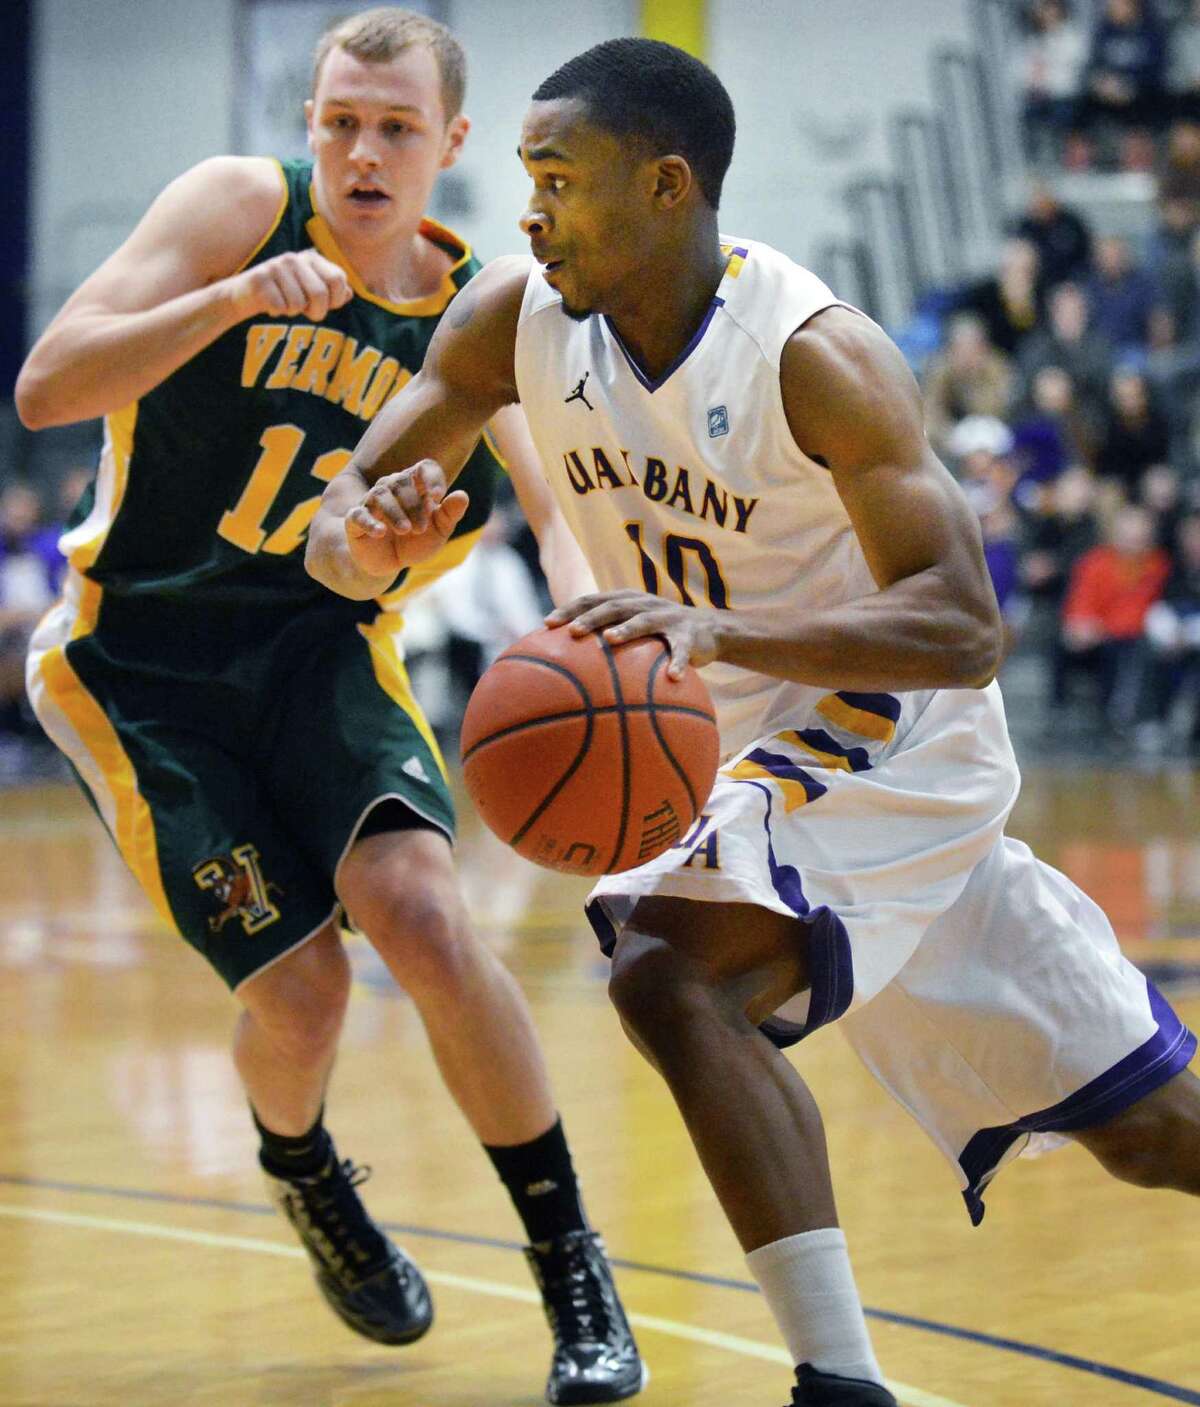 UAlbany's #10 Mike Black drives past Vermont's #12 Sandro Carissimo, at left, during an America East game at Sefcu Arena in Albany Saturday Jan. 26, 2013. (John Carl D'Annibale / Times Union)